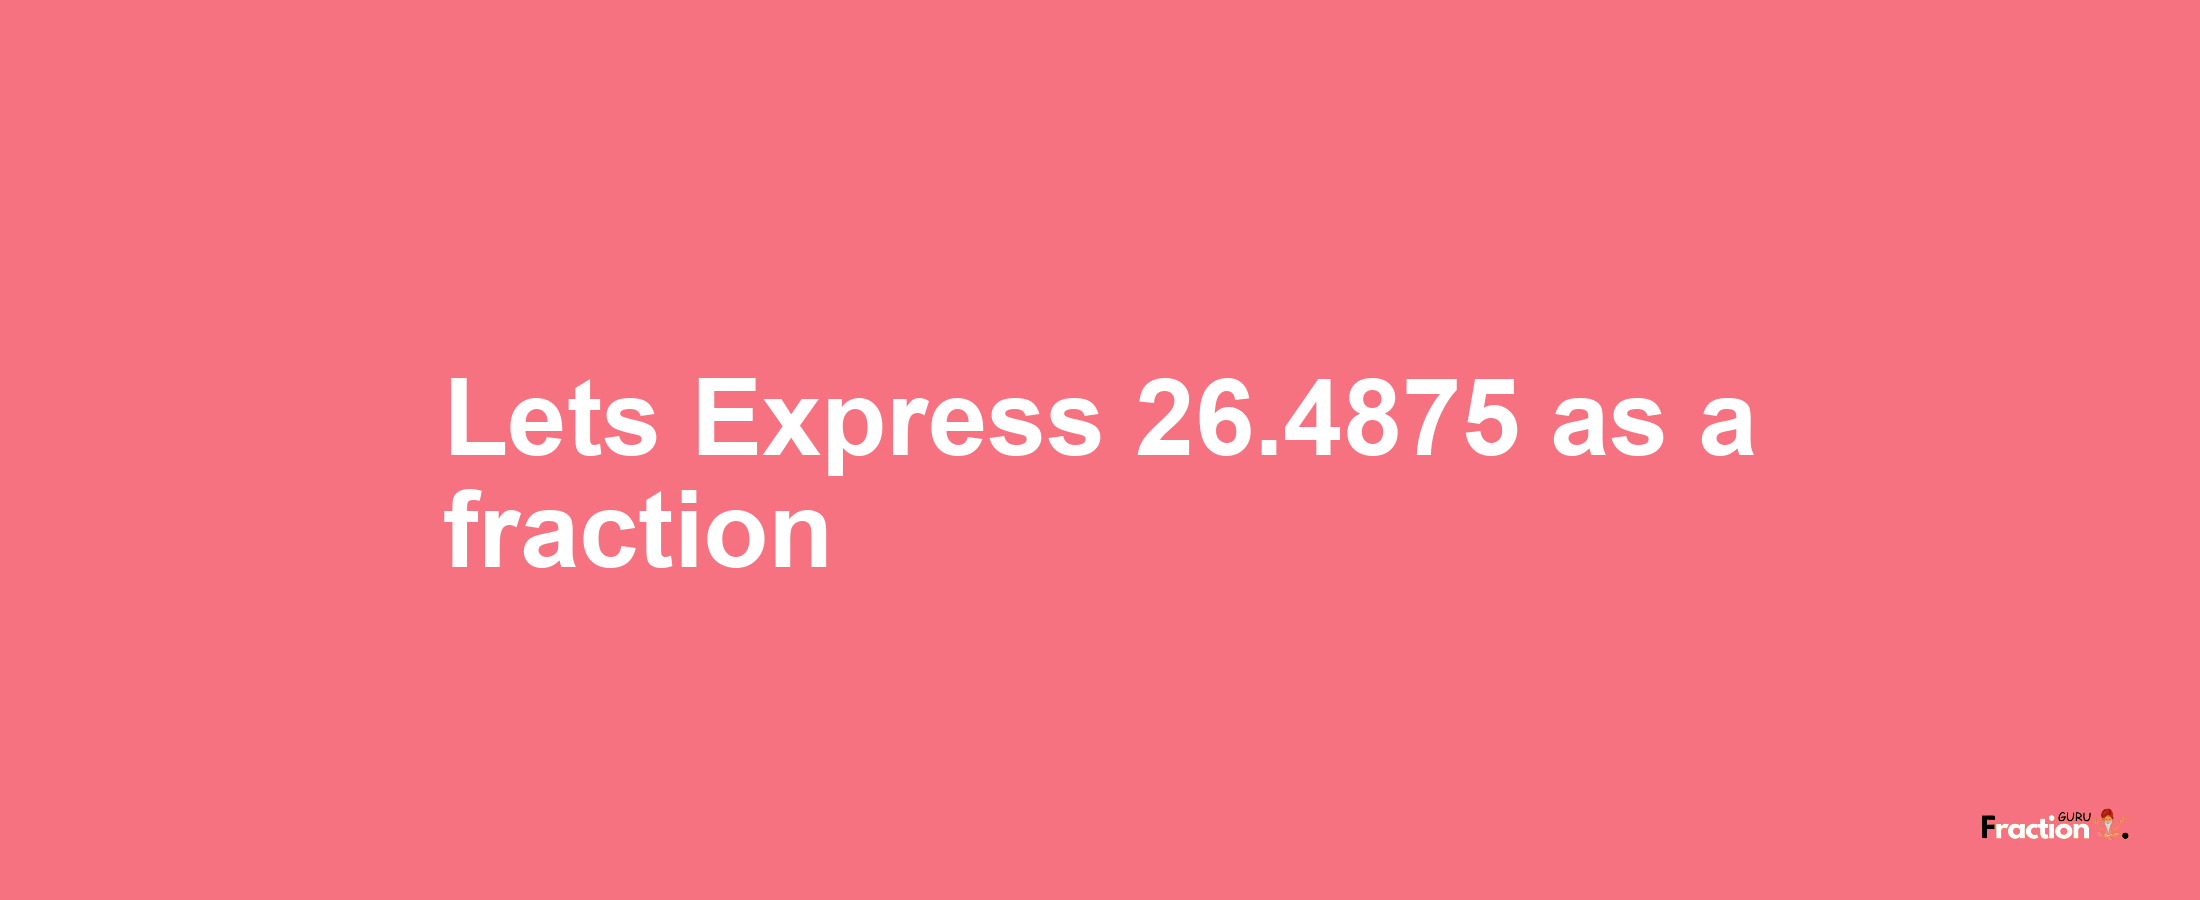 Lets Express 26.4875 as afraction